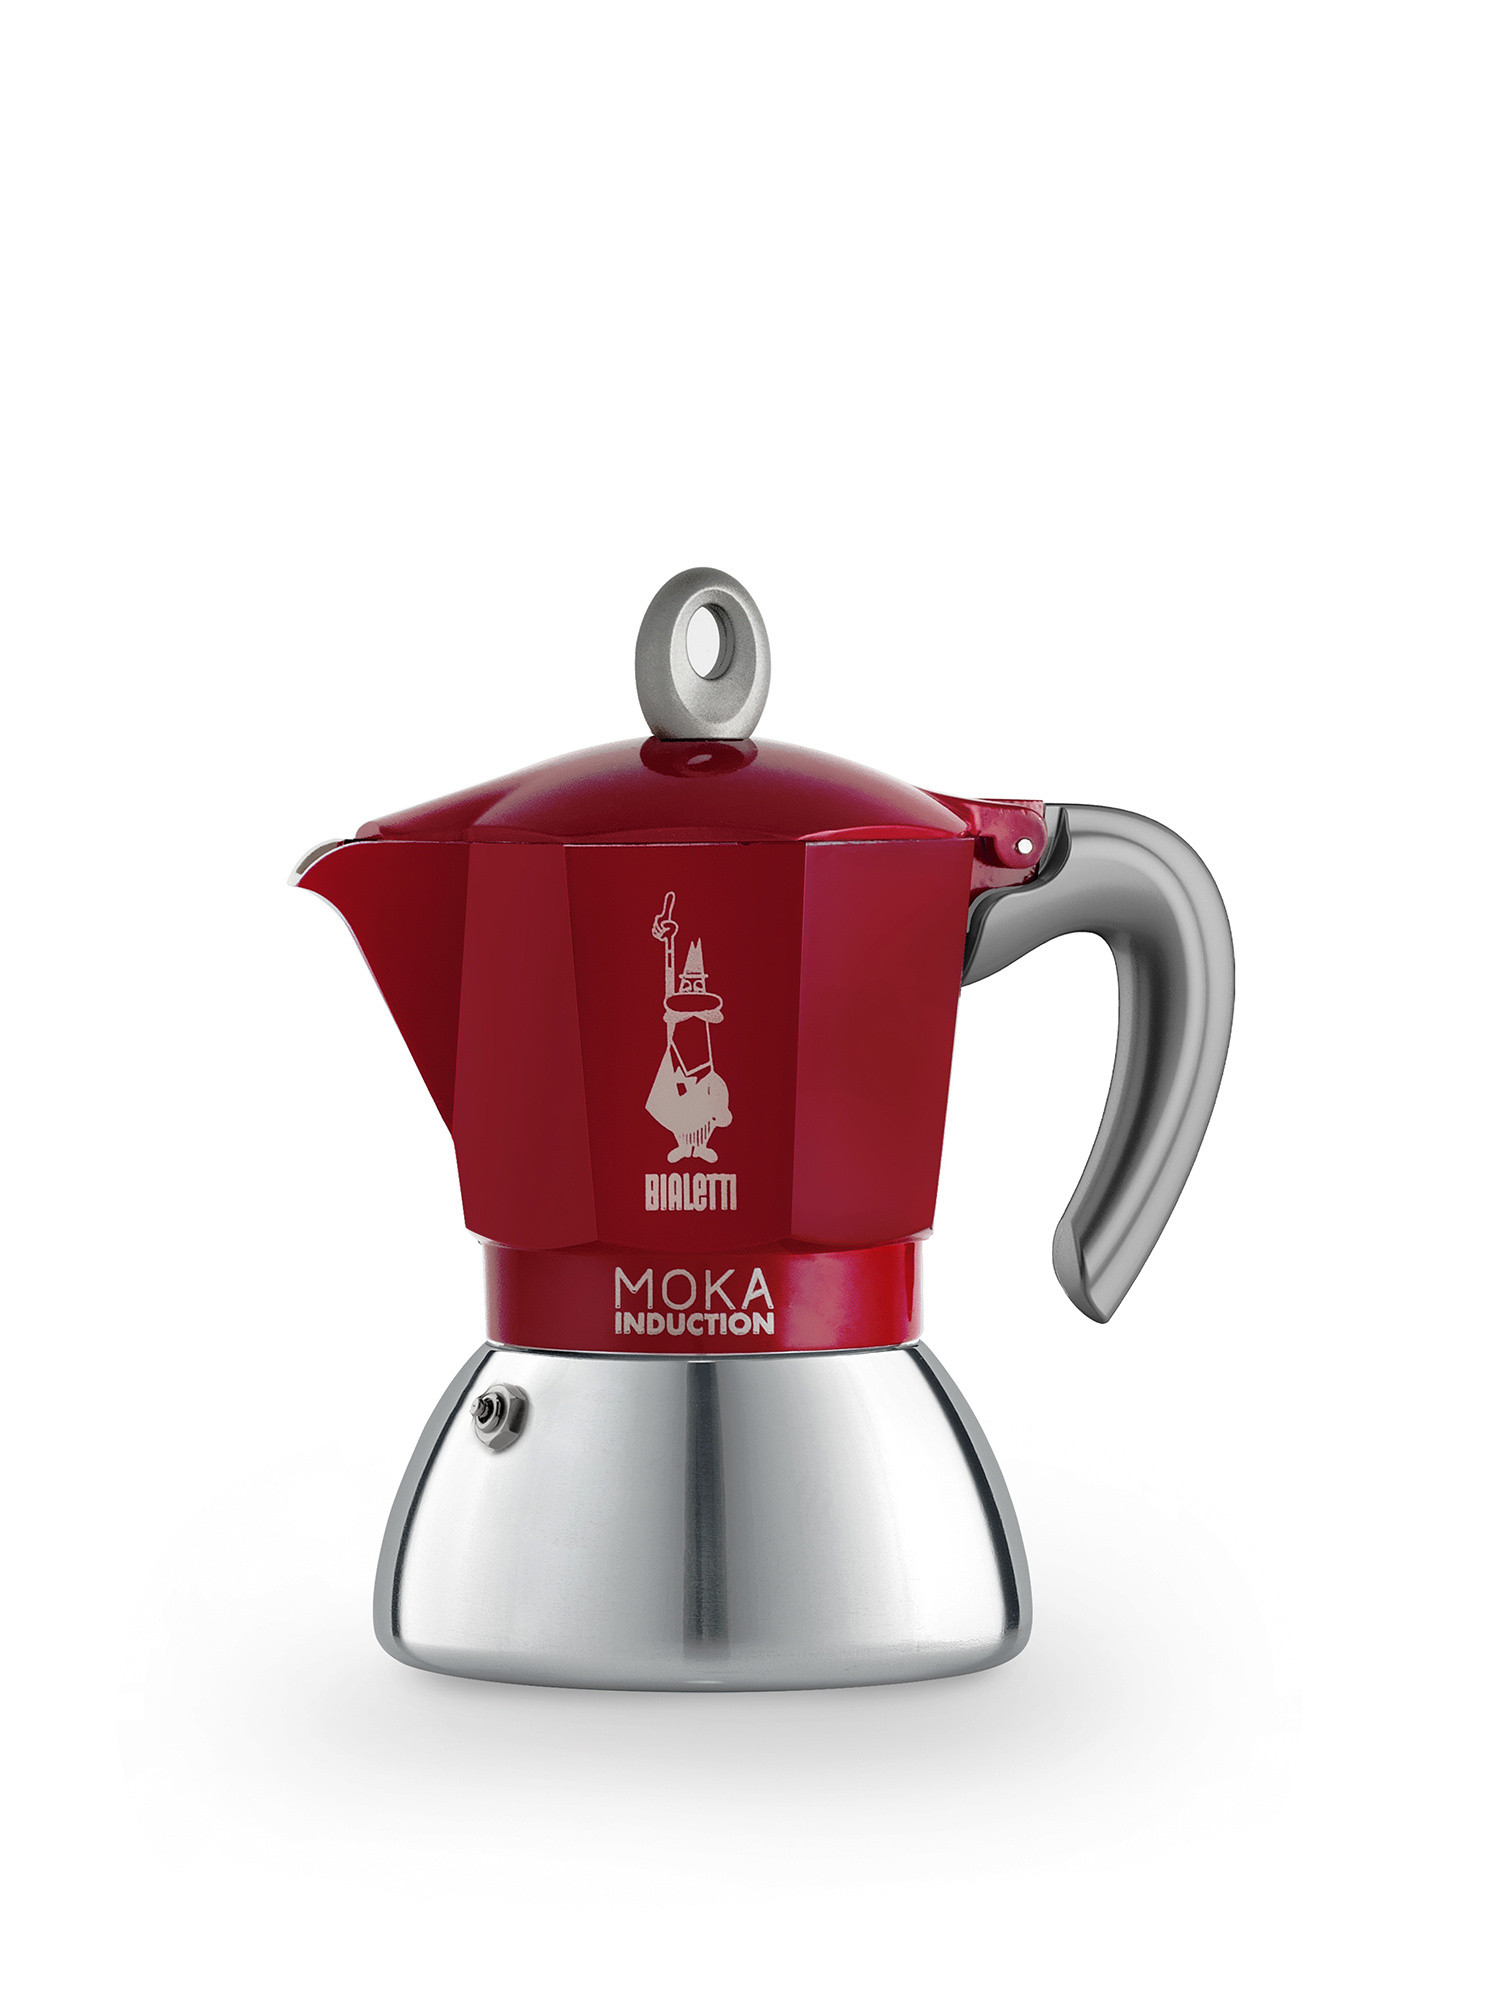 Bialetti - Moka Induction 4 cups, Red, large image number 0